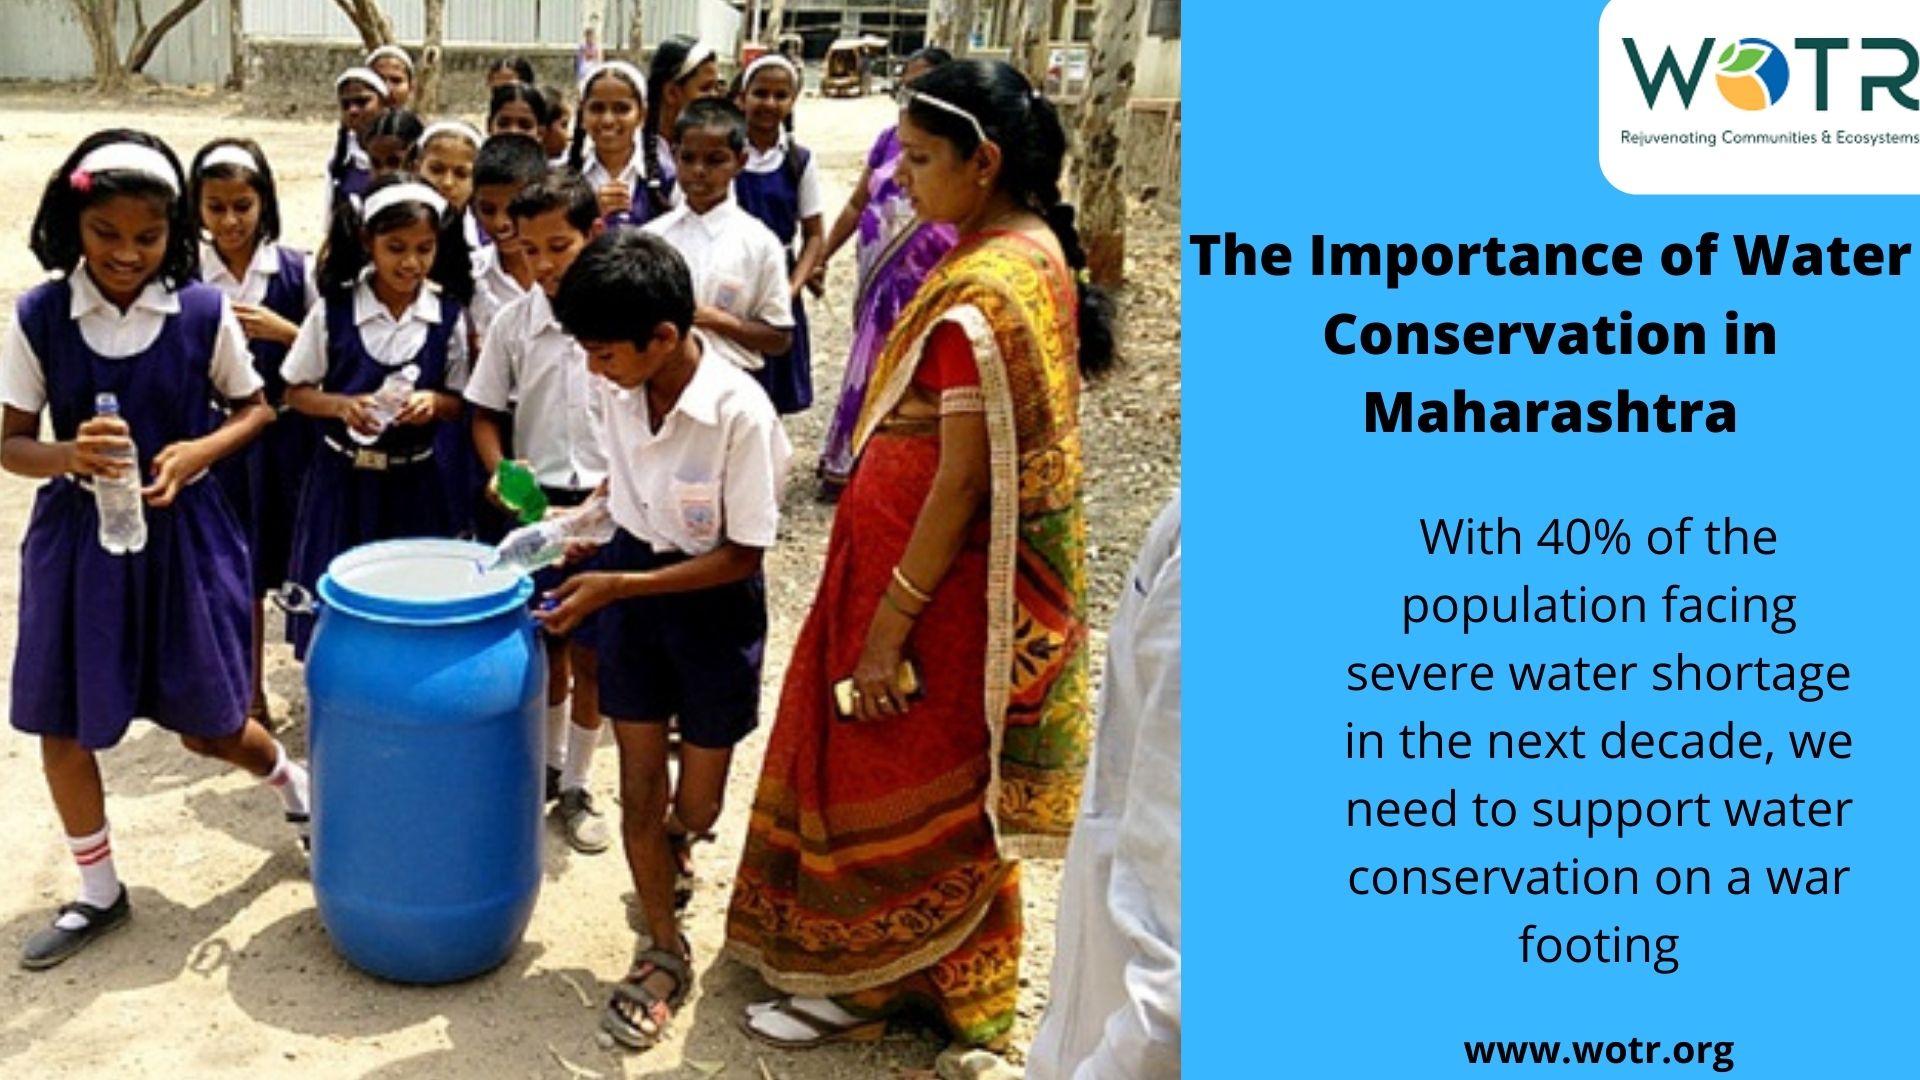 NGOs working for water conservation in Maharashtra